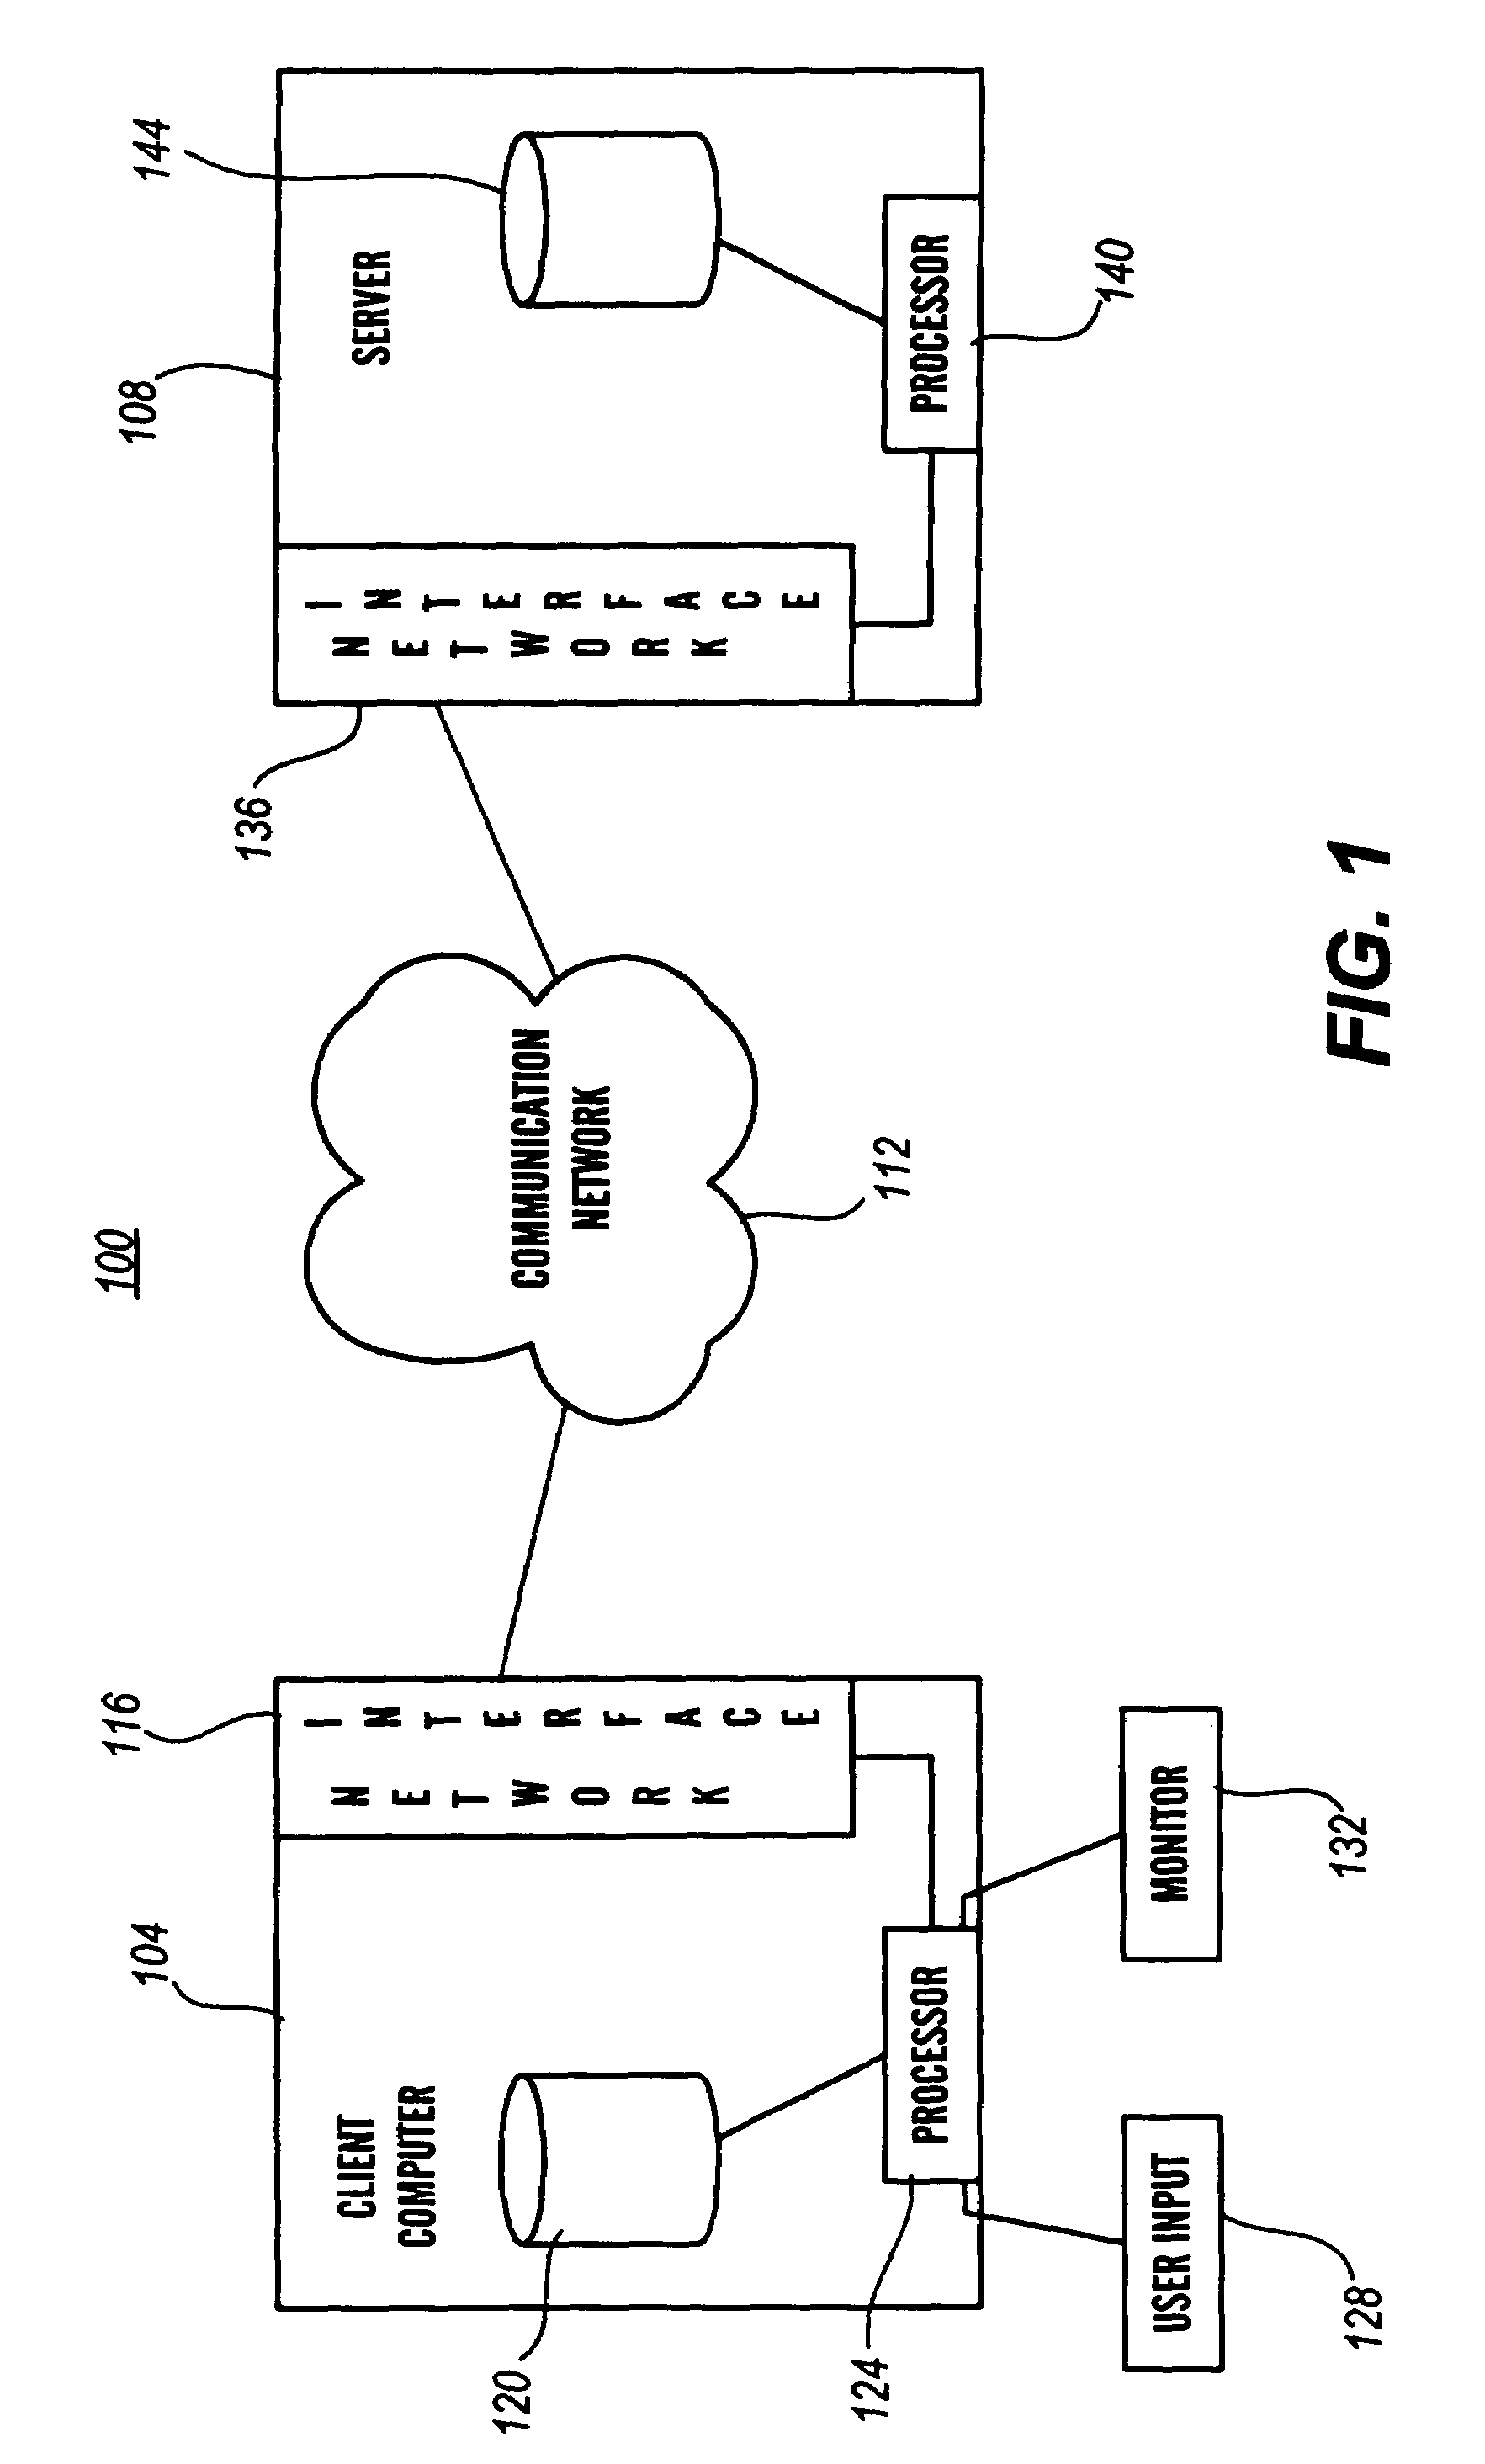 Method and apparatus for guessing correct URLs using tree matching